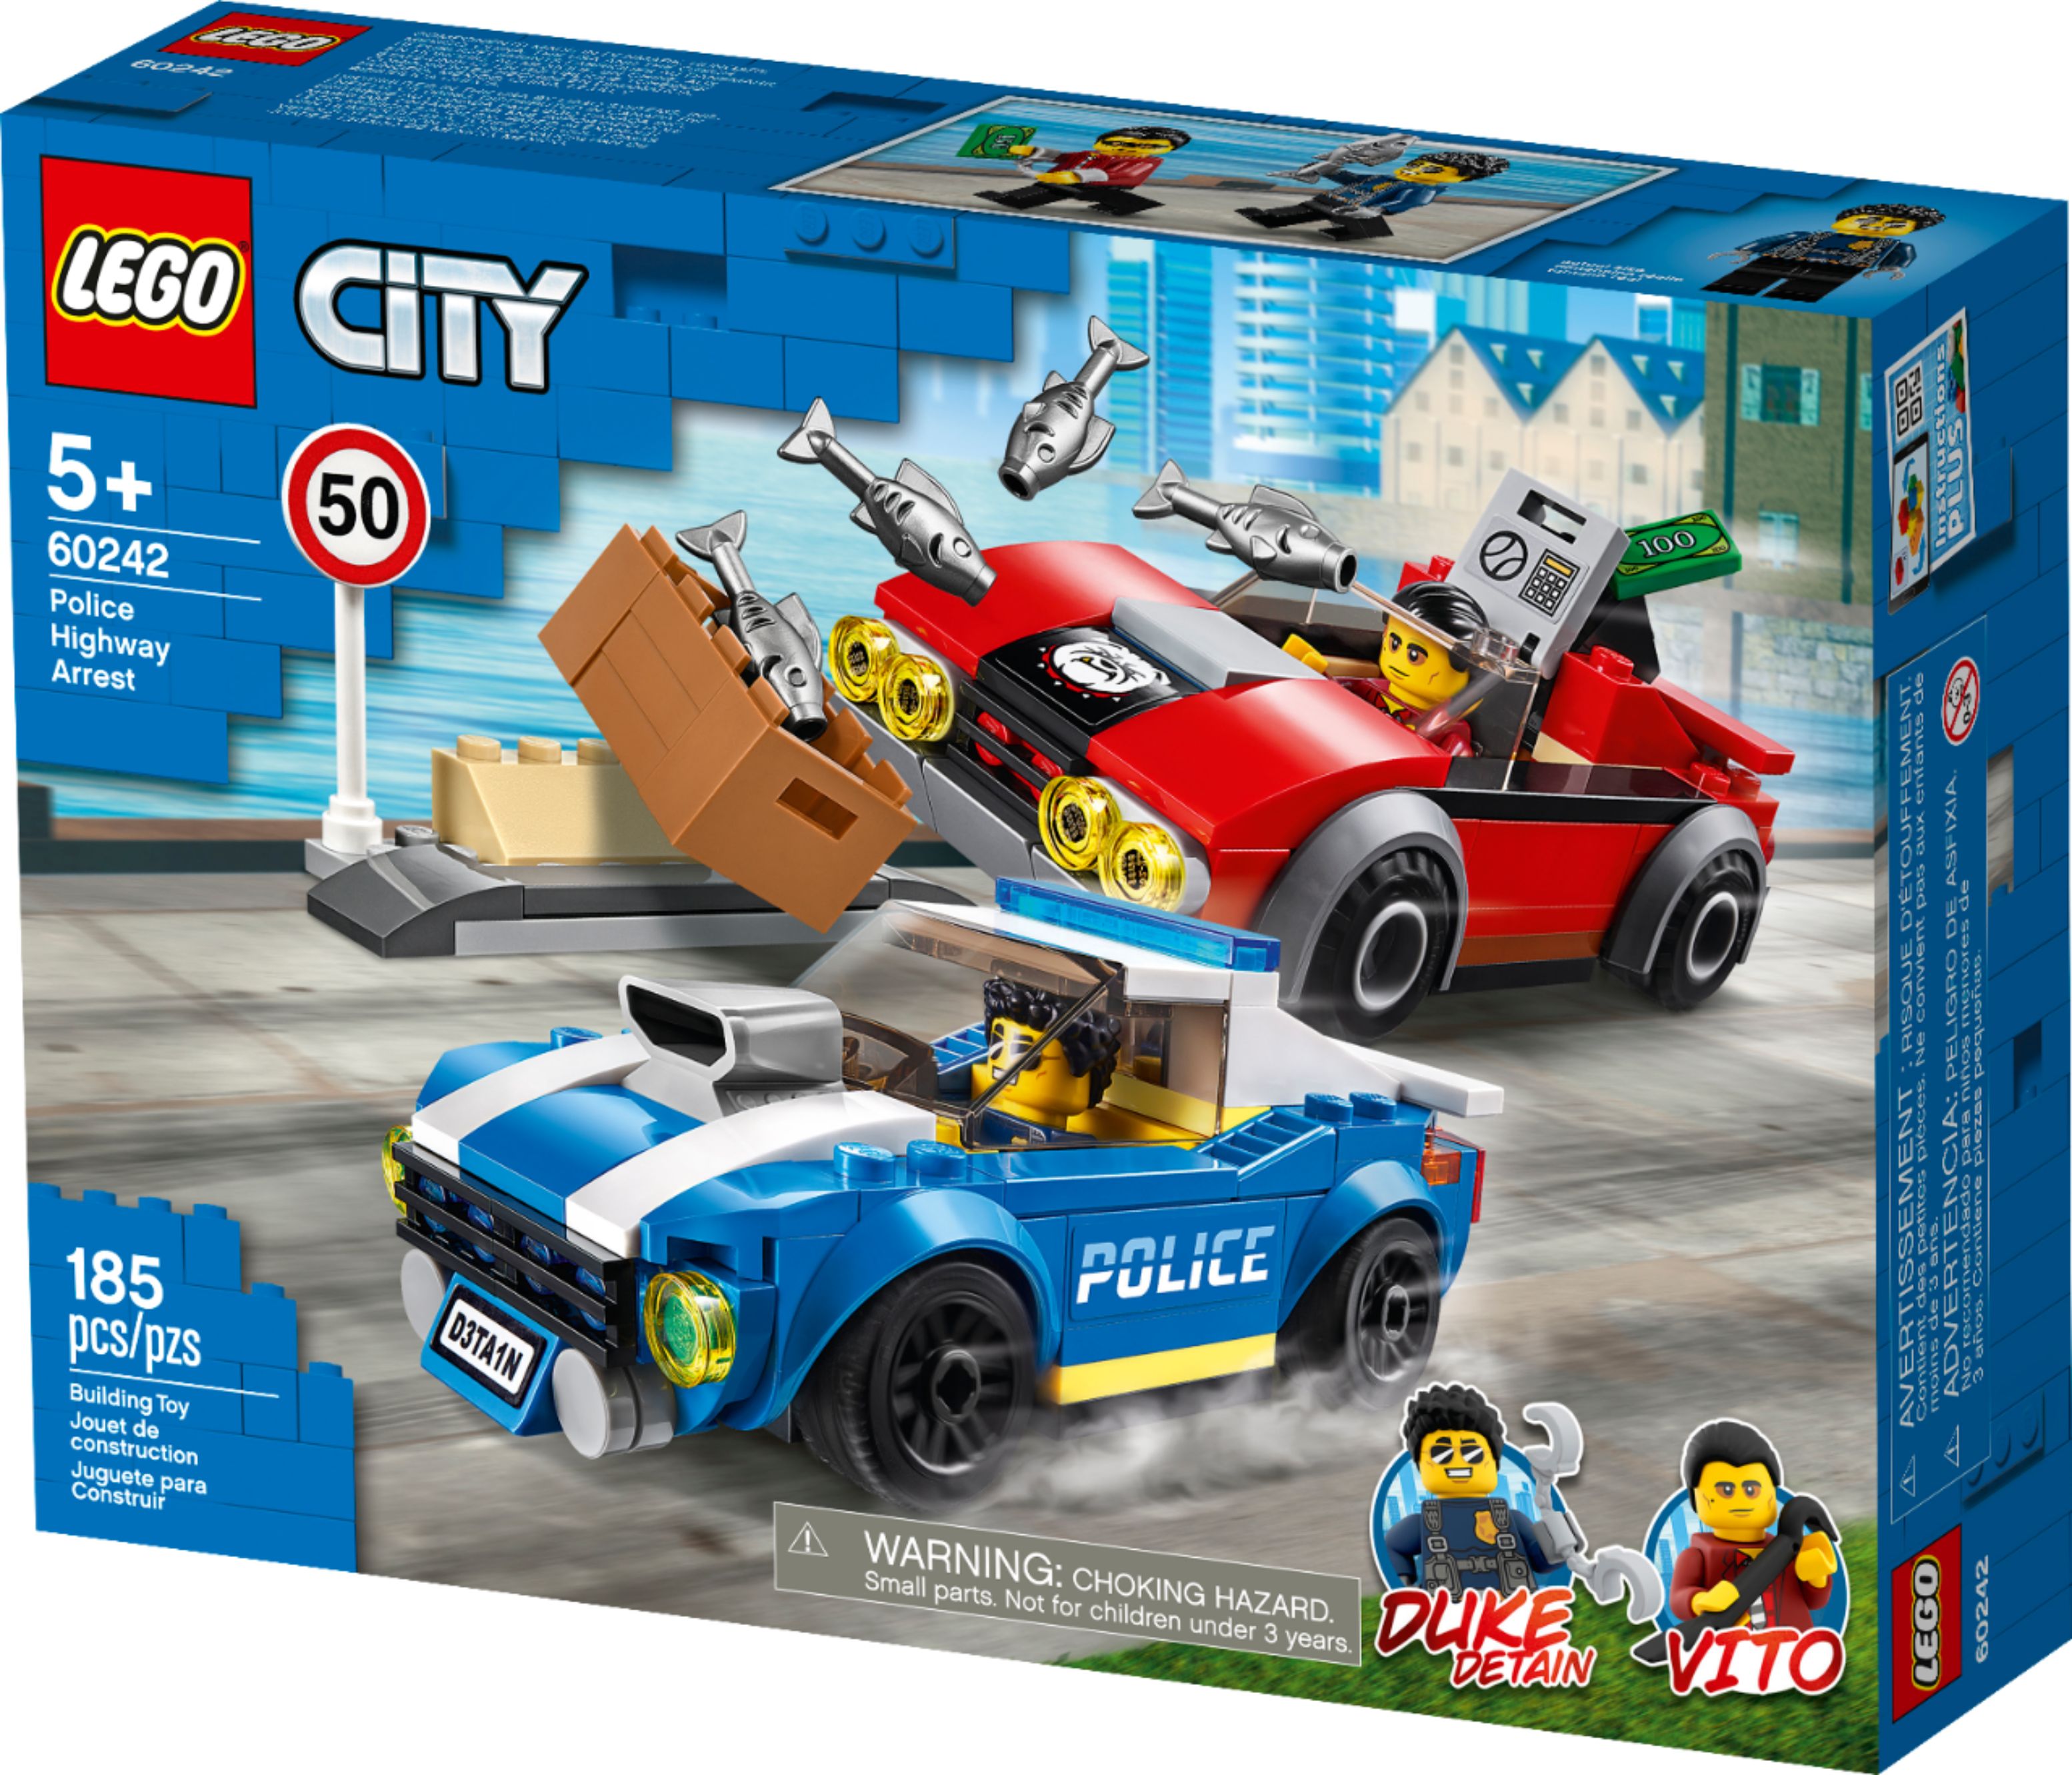 Very Good Gift! New LEGO City Great Vehicles Police Highway Arrest Set 60242 5 